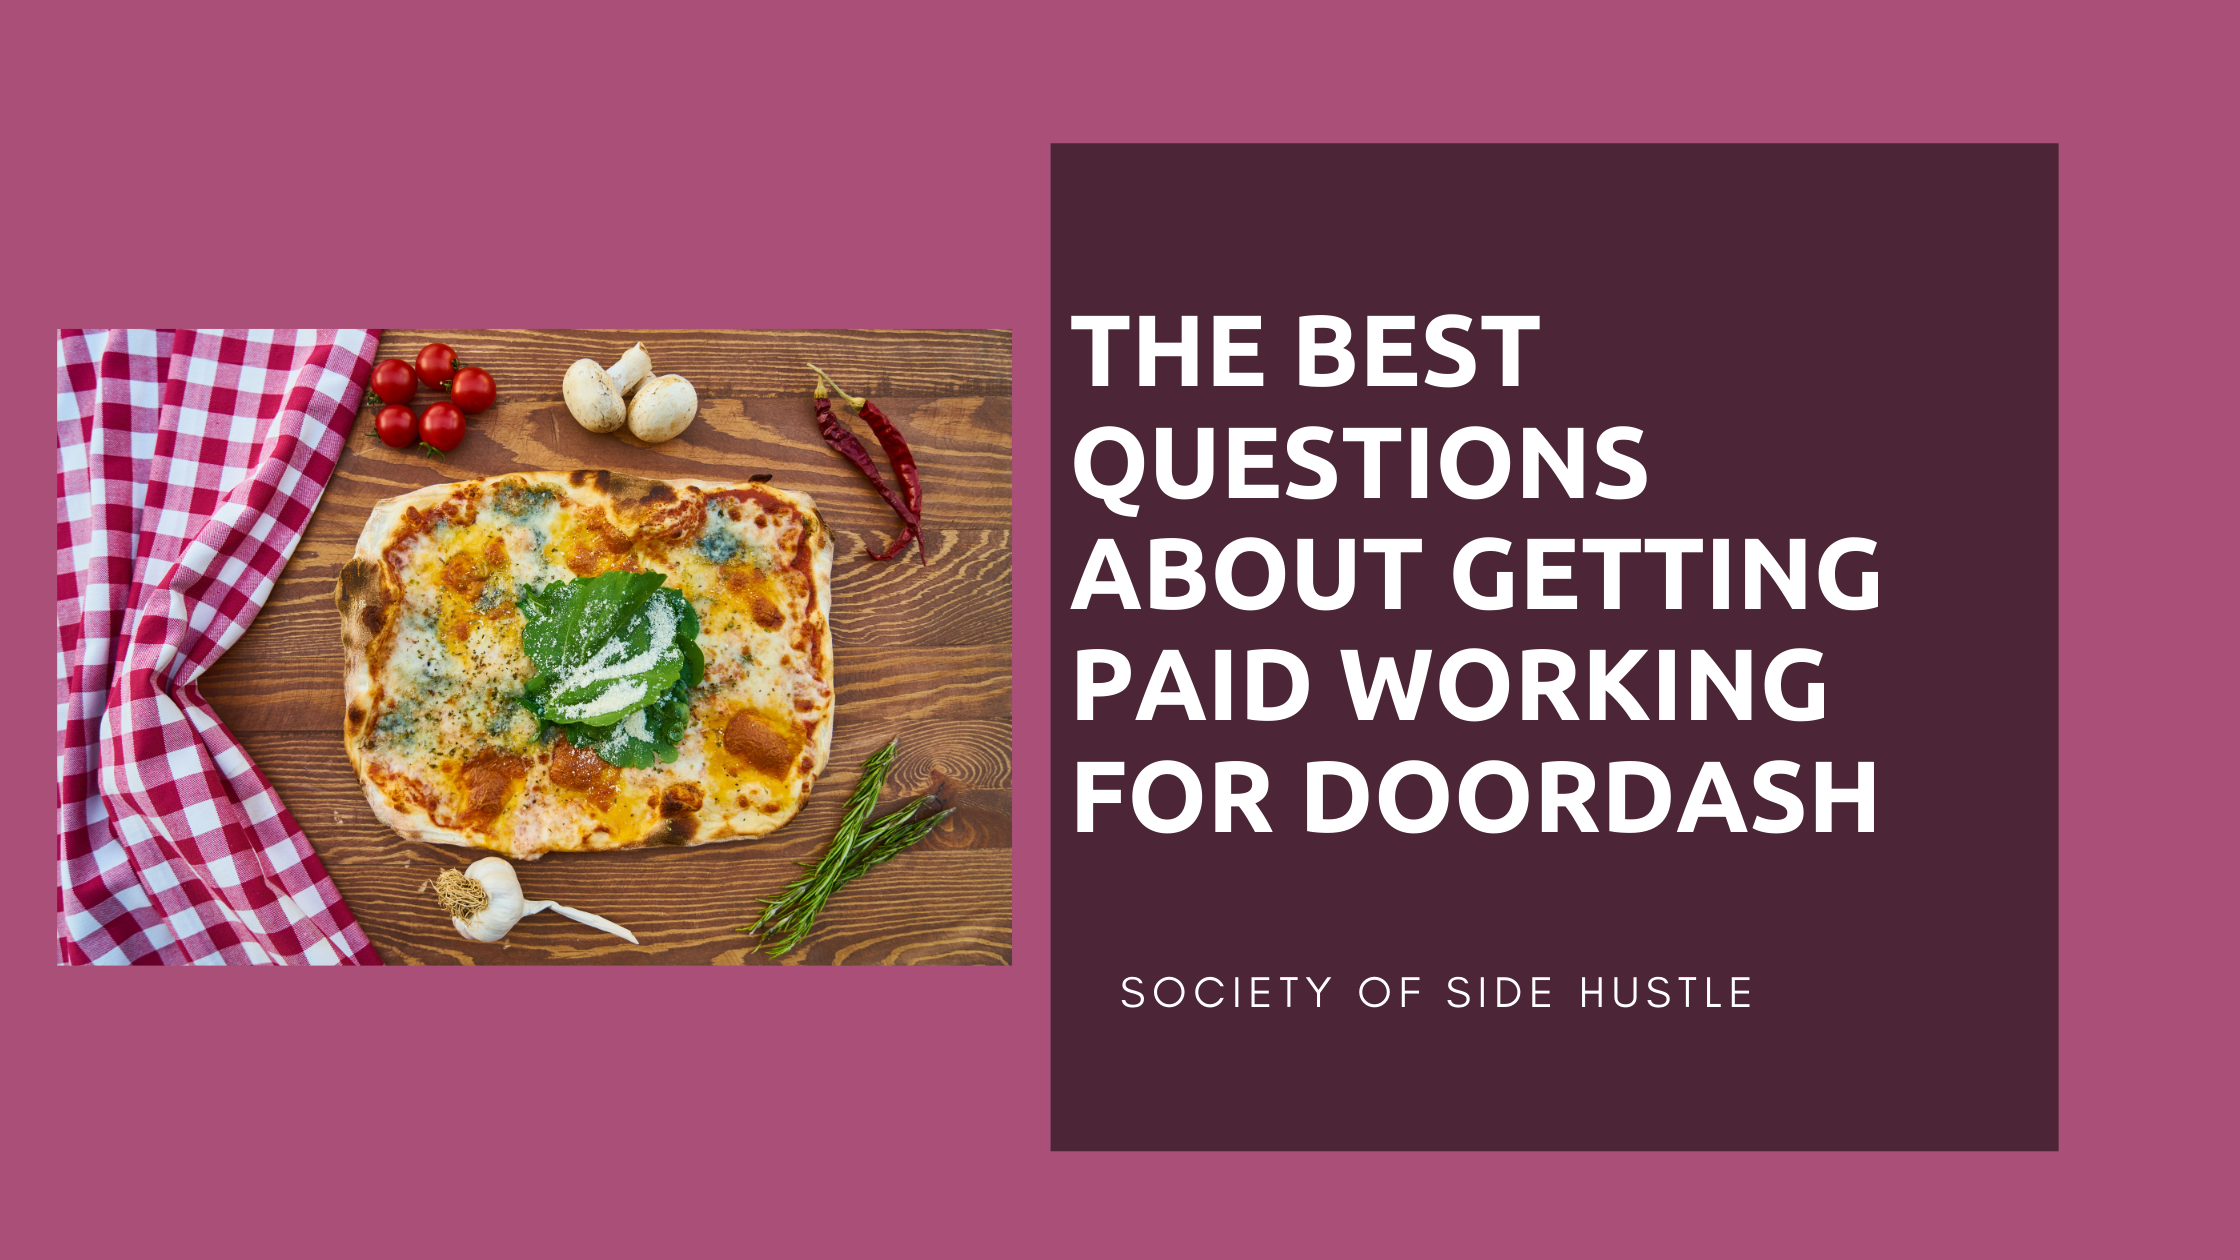 The Best Questions about Getting Paid Working for Doordash